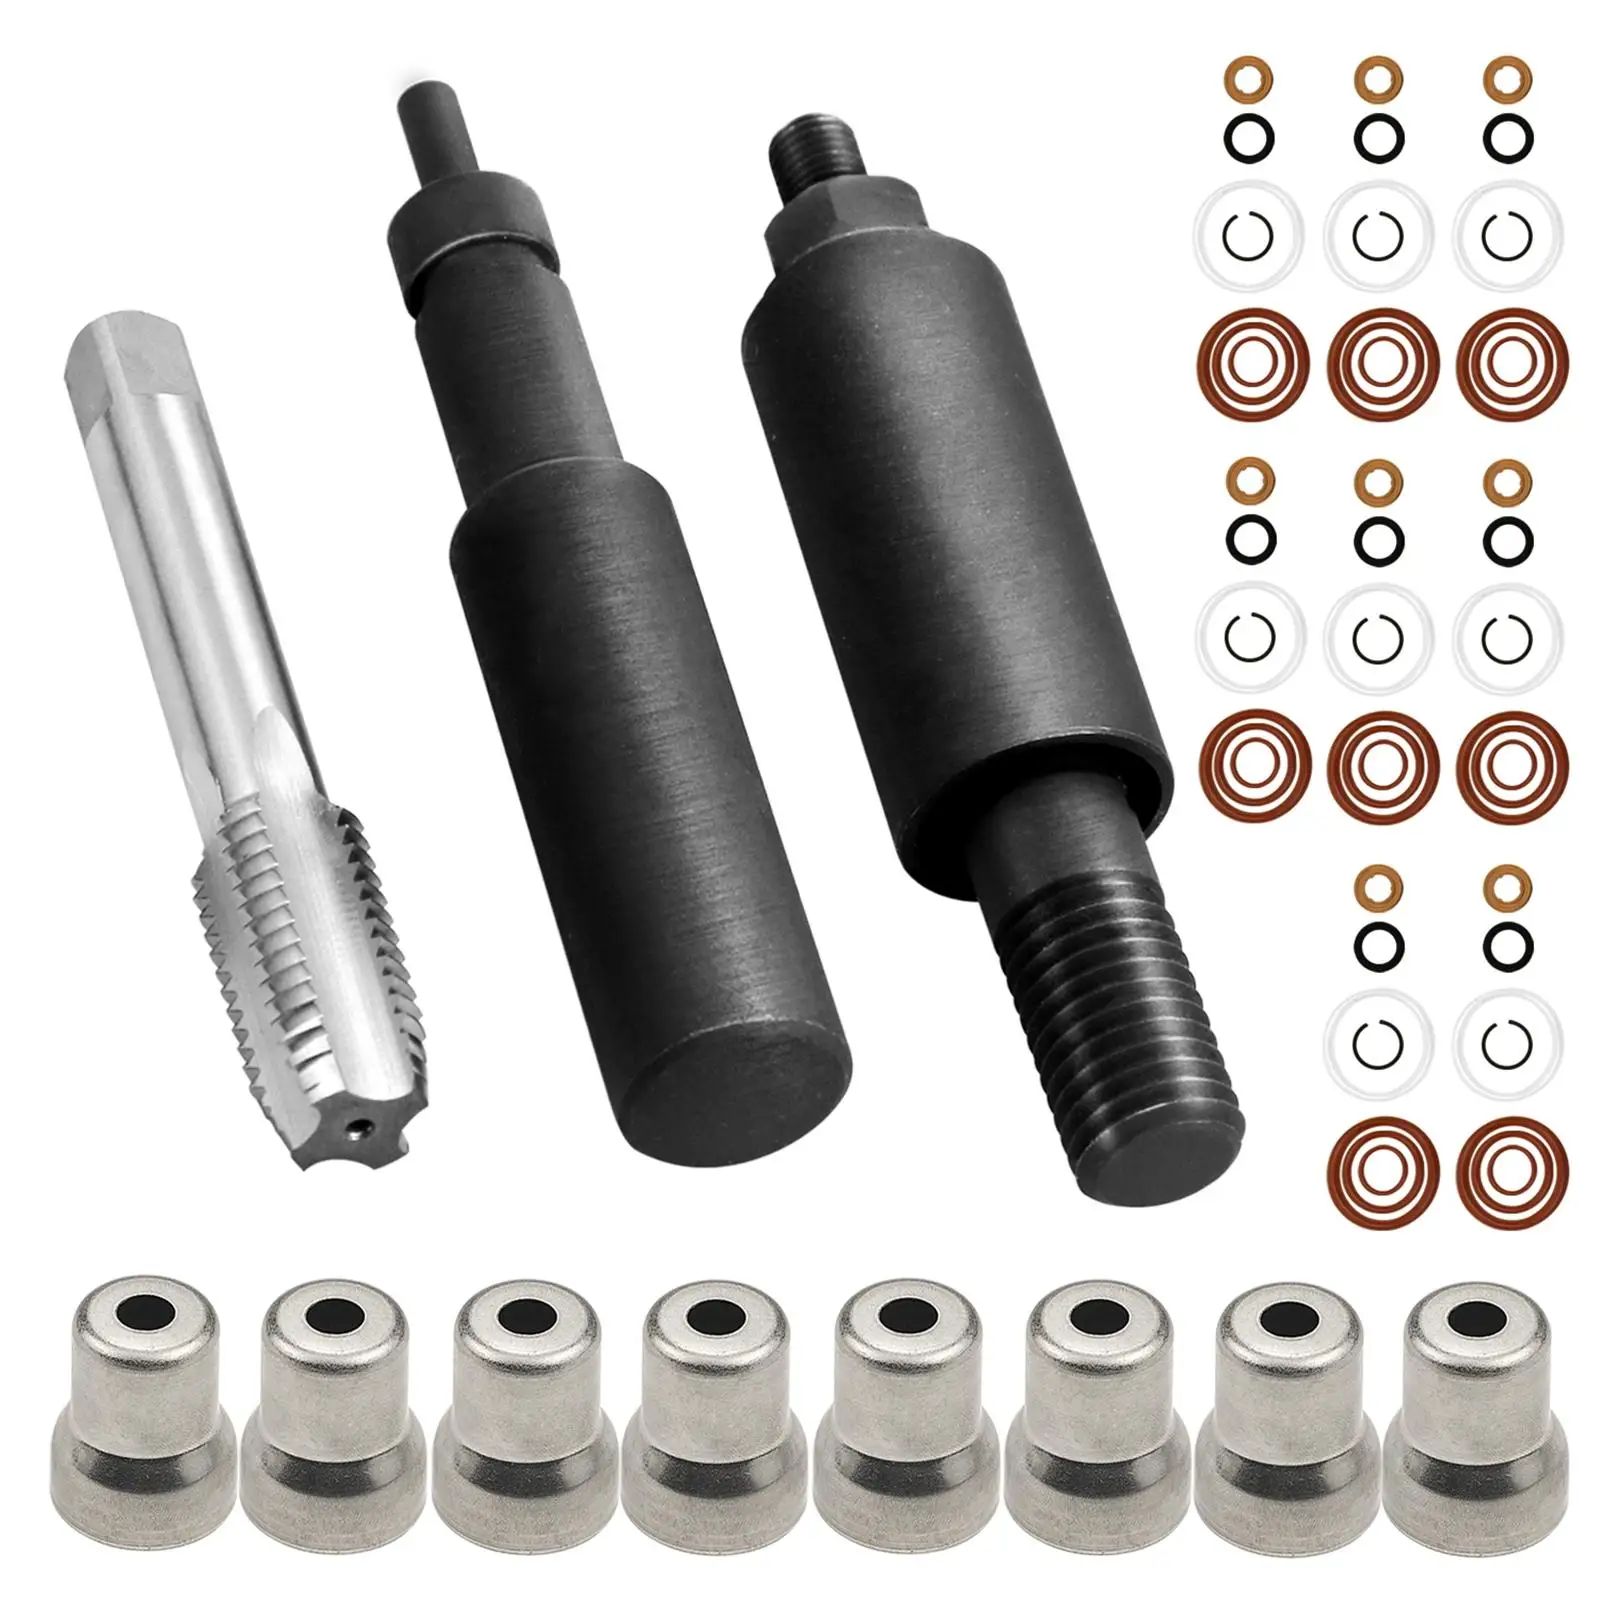 Fuel Injector Sleeve Puller Installer Set Spare Parts with Cups and Rings for Ford 6.0L Easily to Install Premium